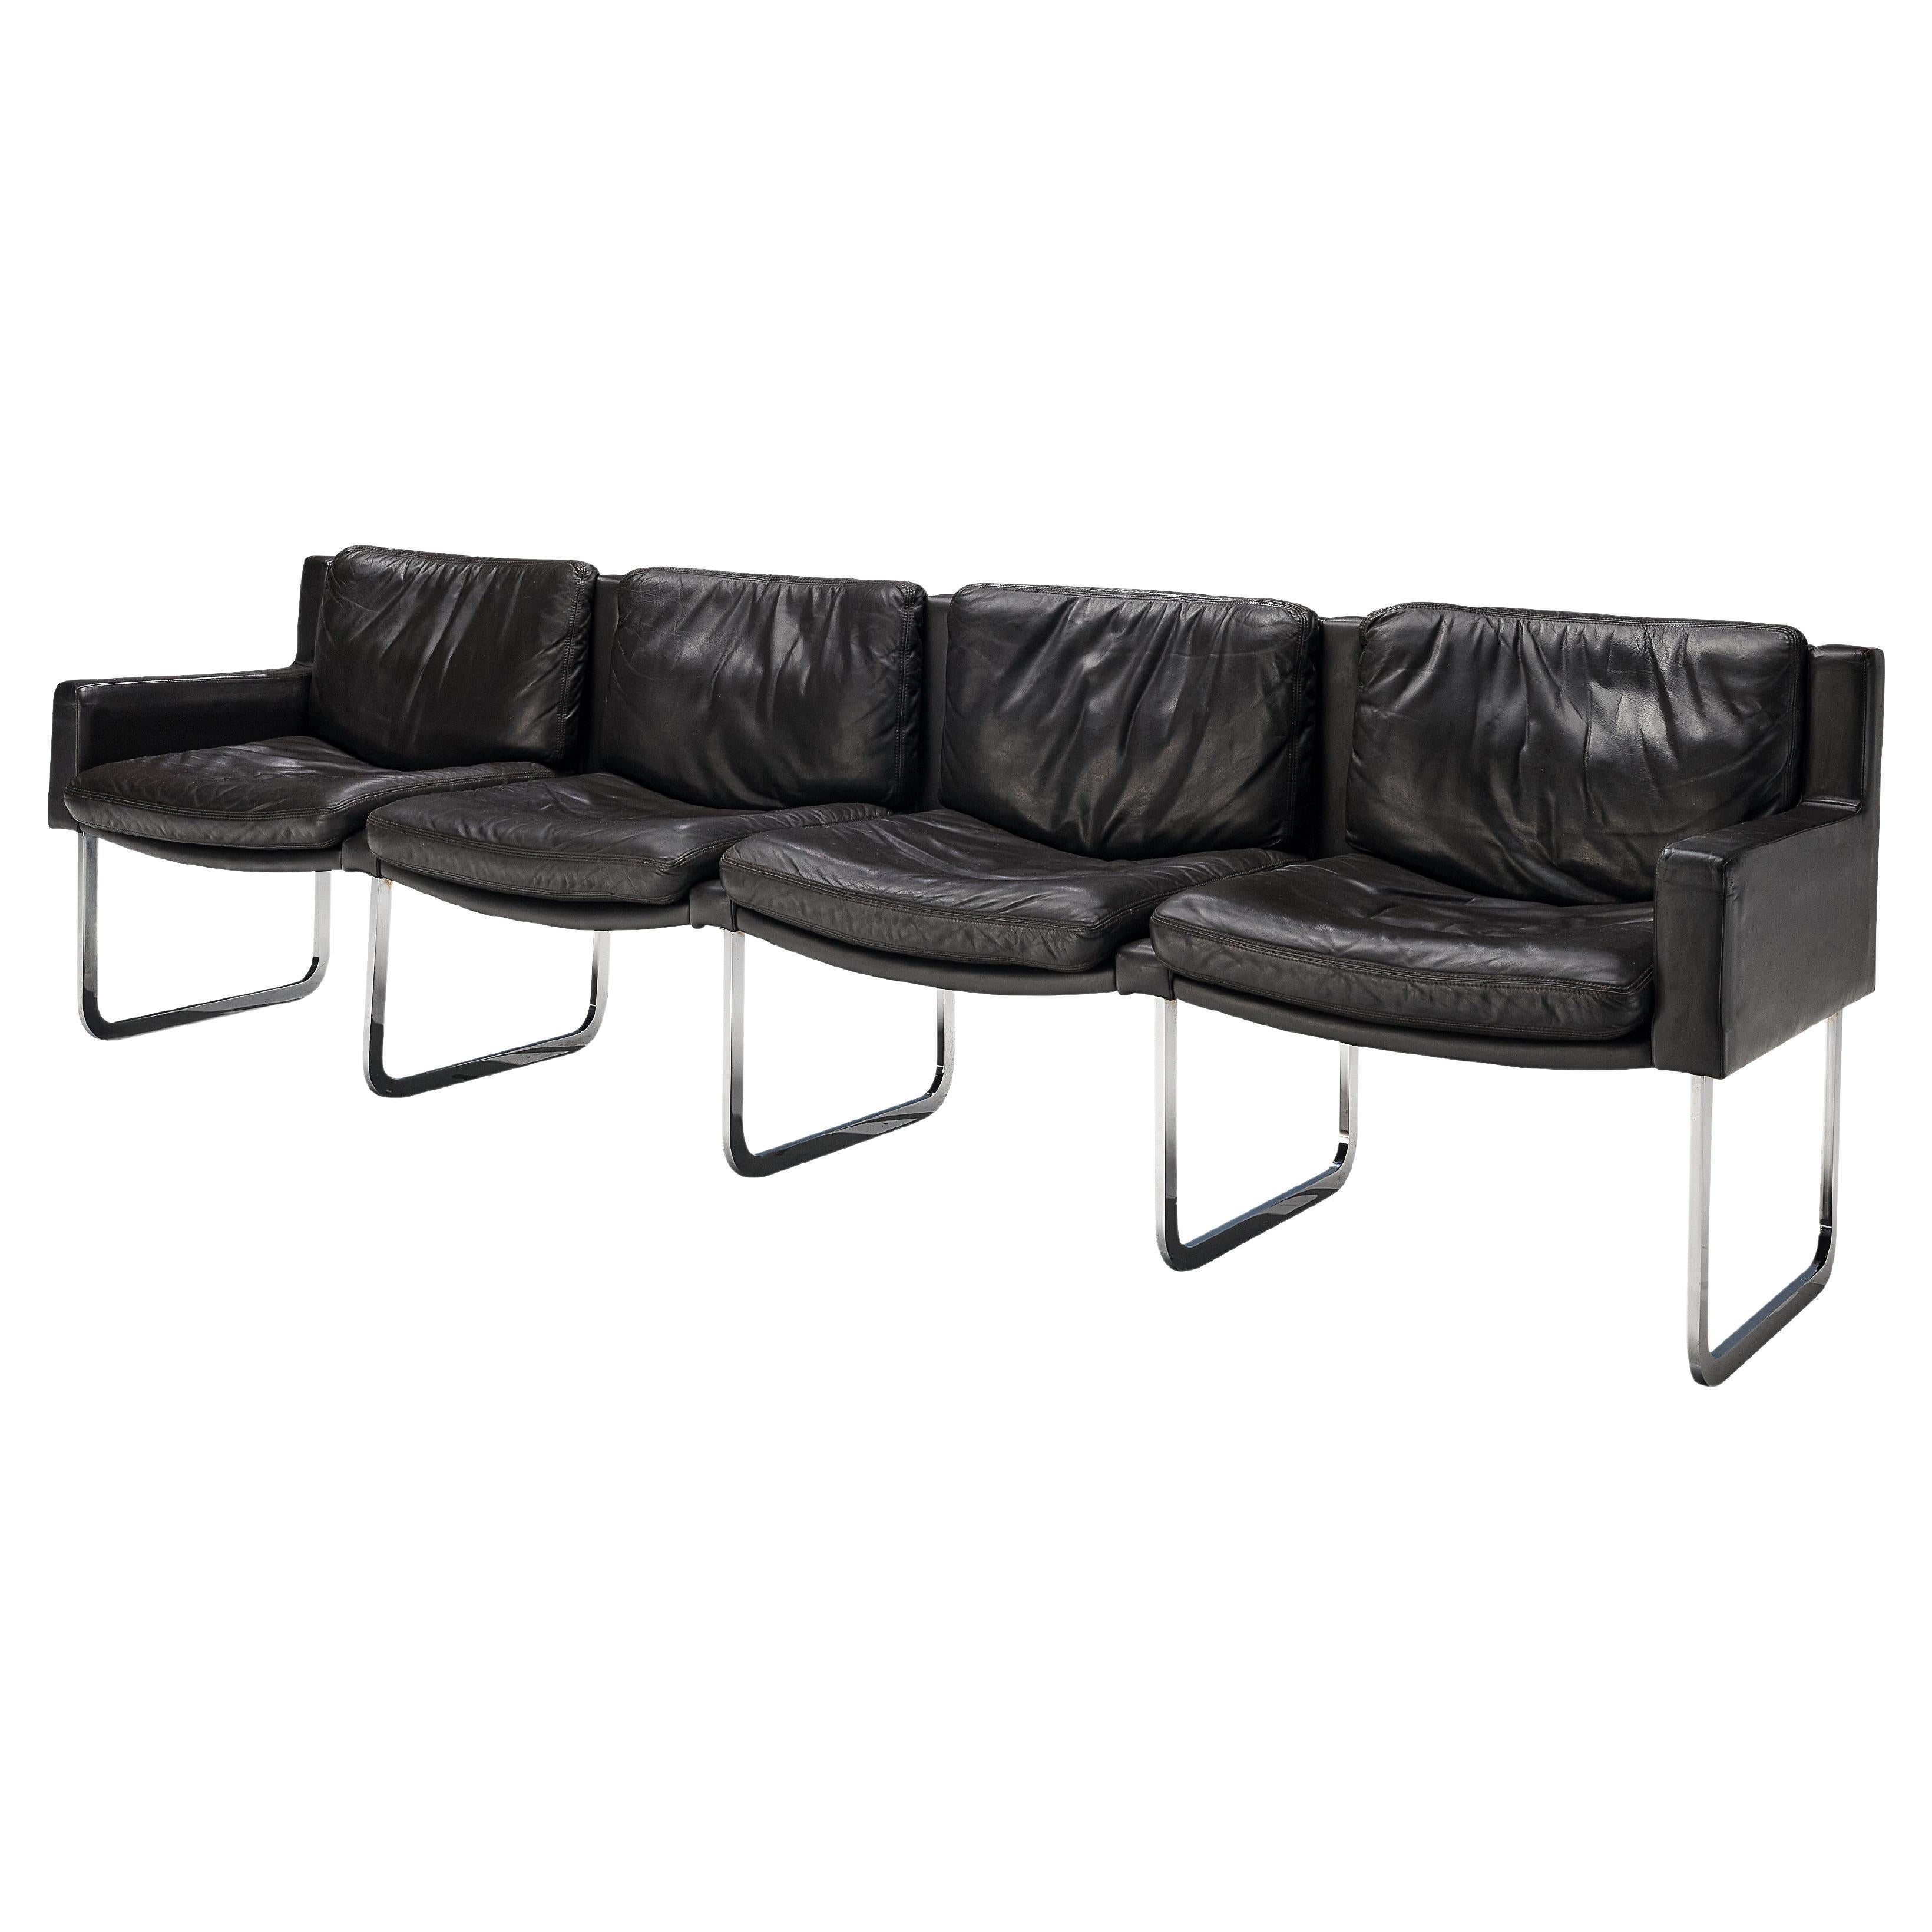 Elegant Four-Seat Sofa in Black Leather and Steel